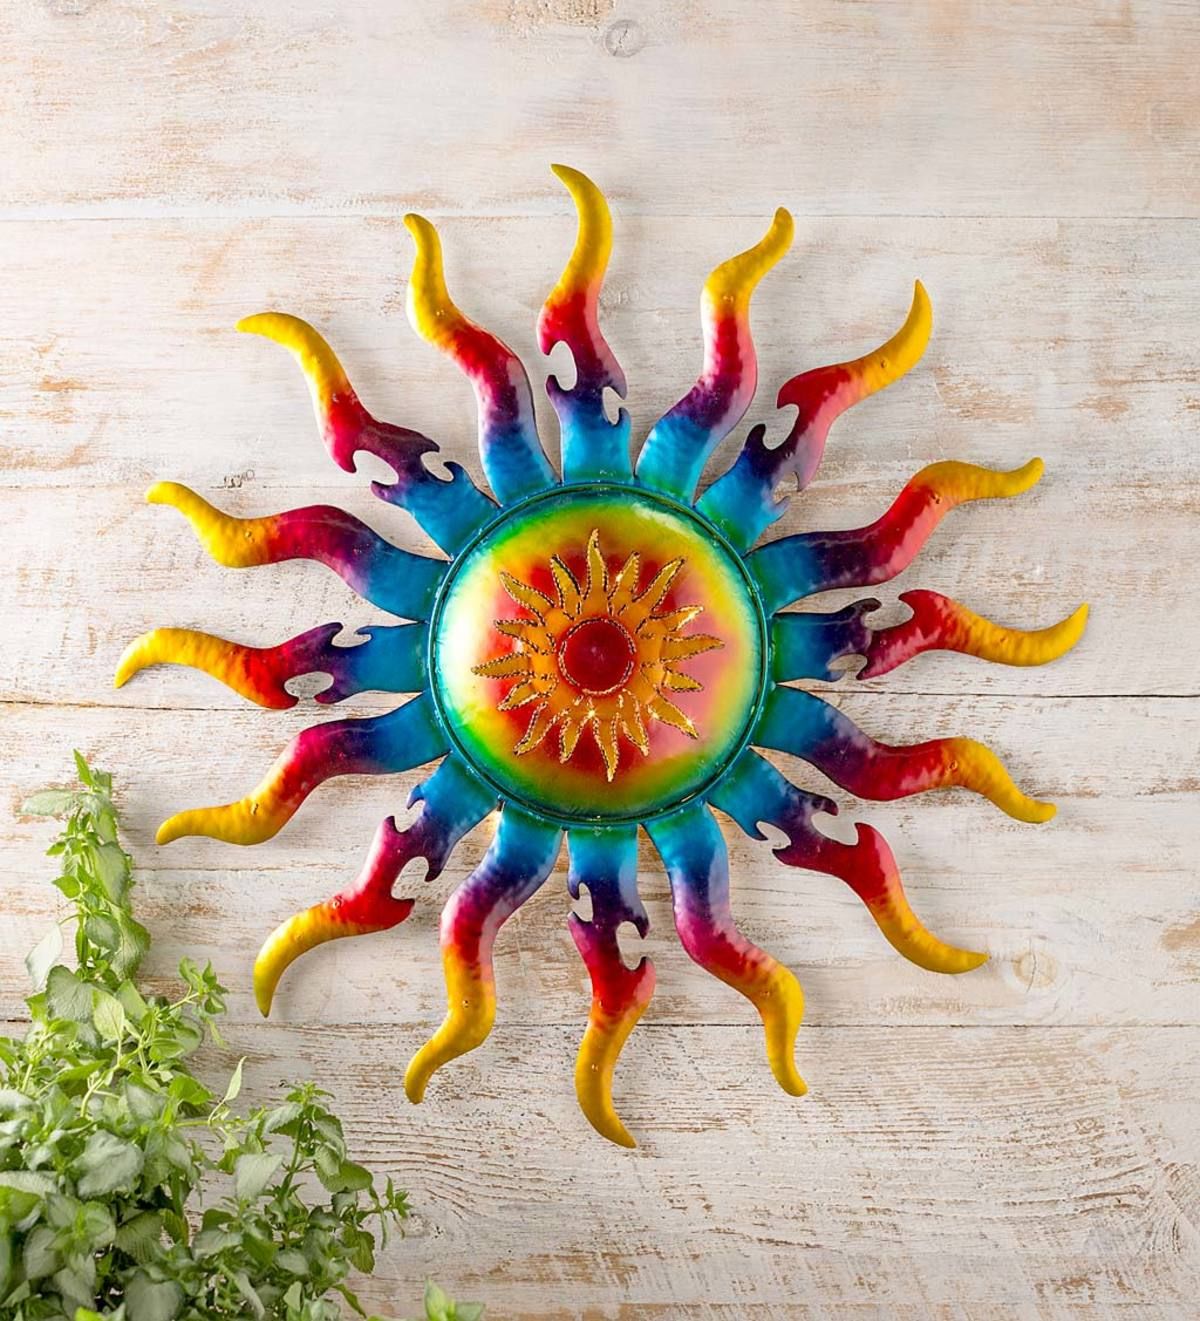 Handcrafted Lighted Metal Sun Wall Art | Wind And Weather In Most Current The Sun Wall Art (View 14 of 20)